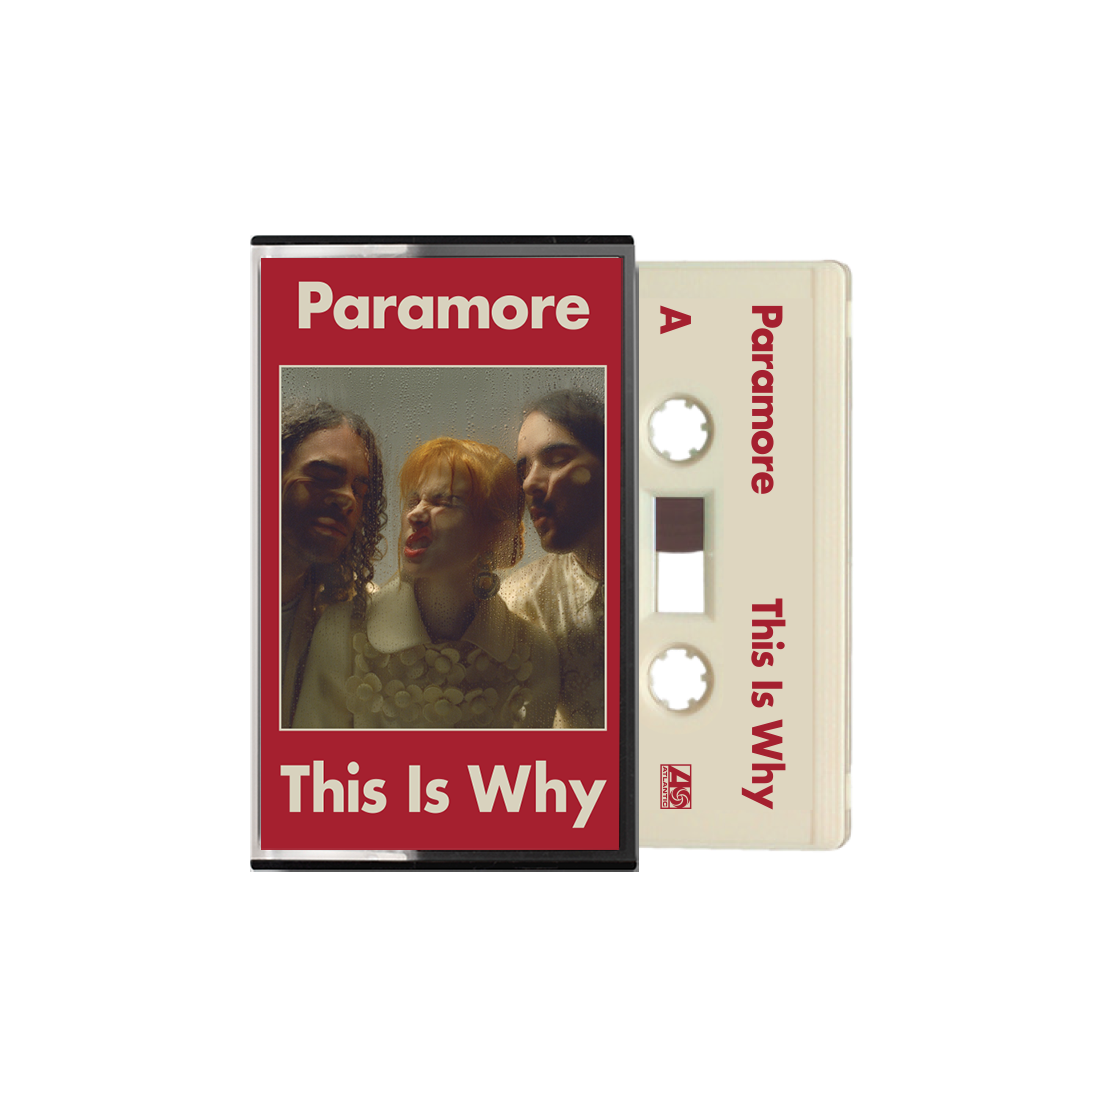 Album artwork for Album artwork for This is Why by Paramore by This is Why - Paramore